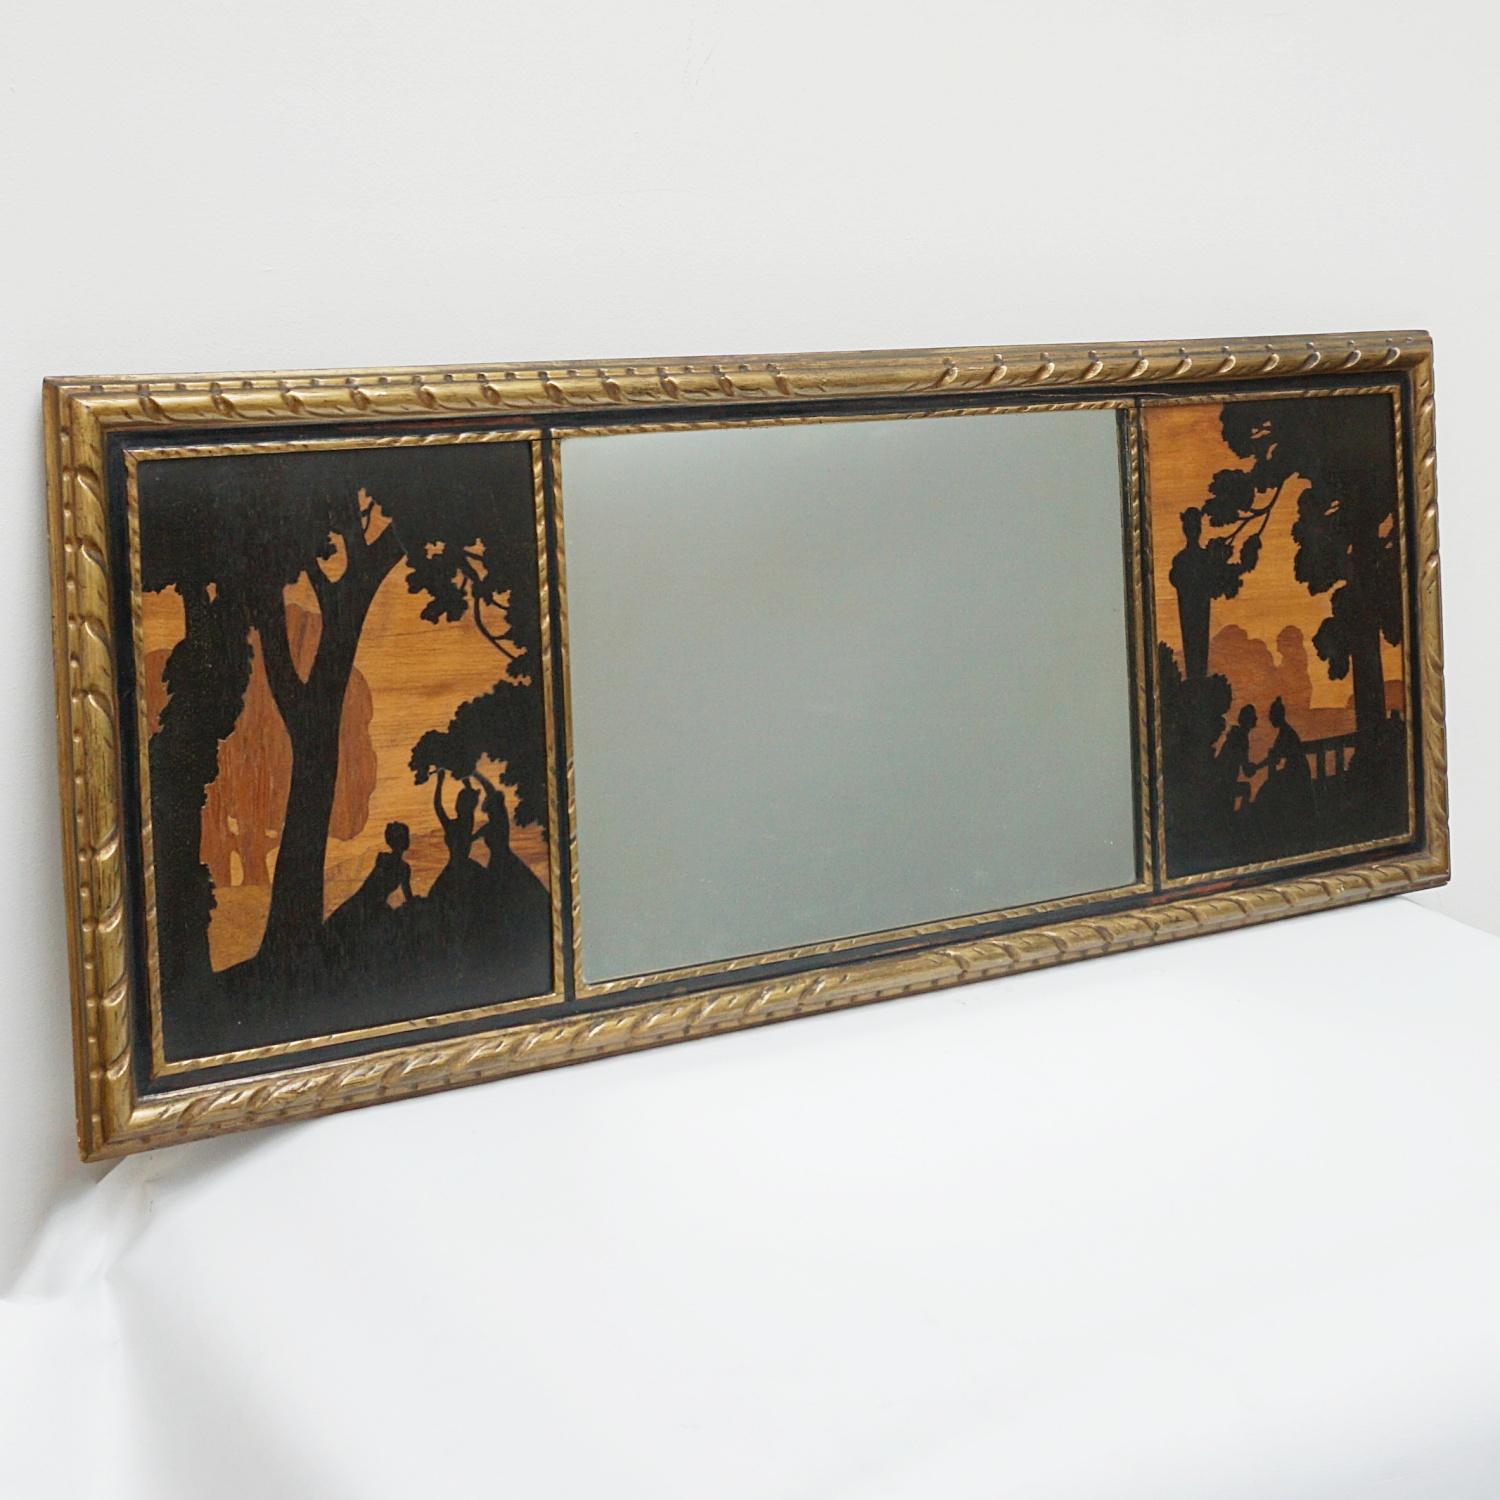 An Arts & Craft's mirror designed by William Chase and Albert James Rowley, produced by the Rowley Gallery. An inlaid wood panel depicting on the left side a group of girls picking fruit from the tree, and on the other side a proposal of engagement